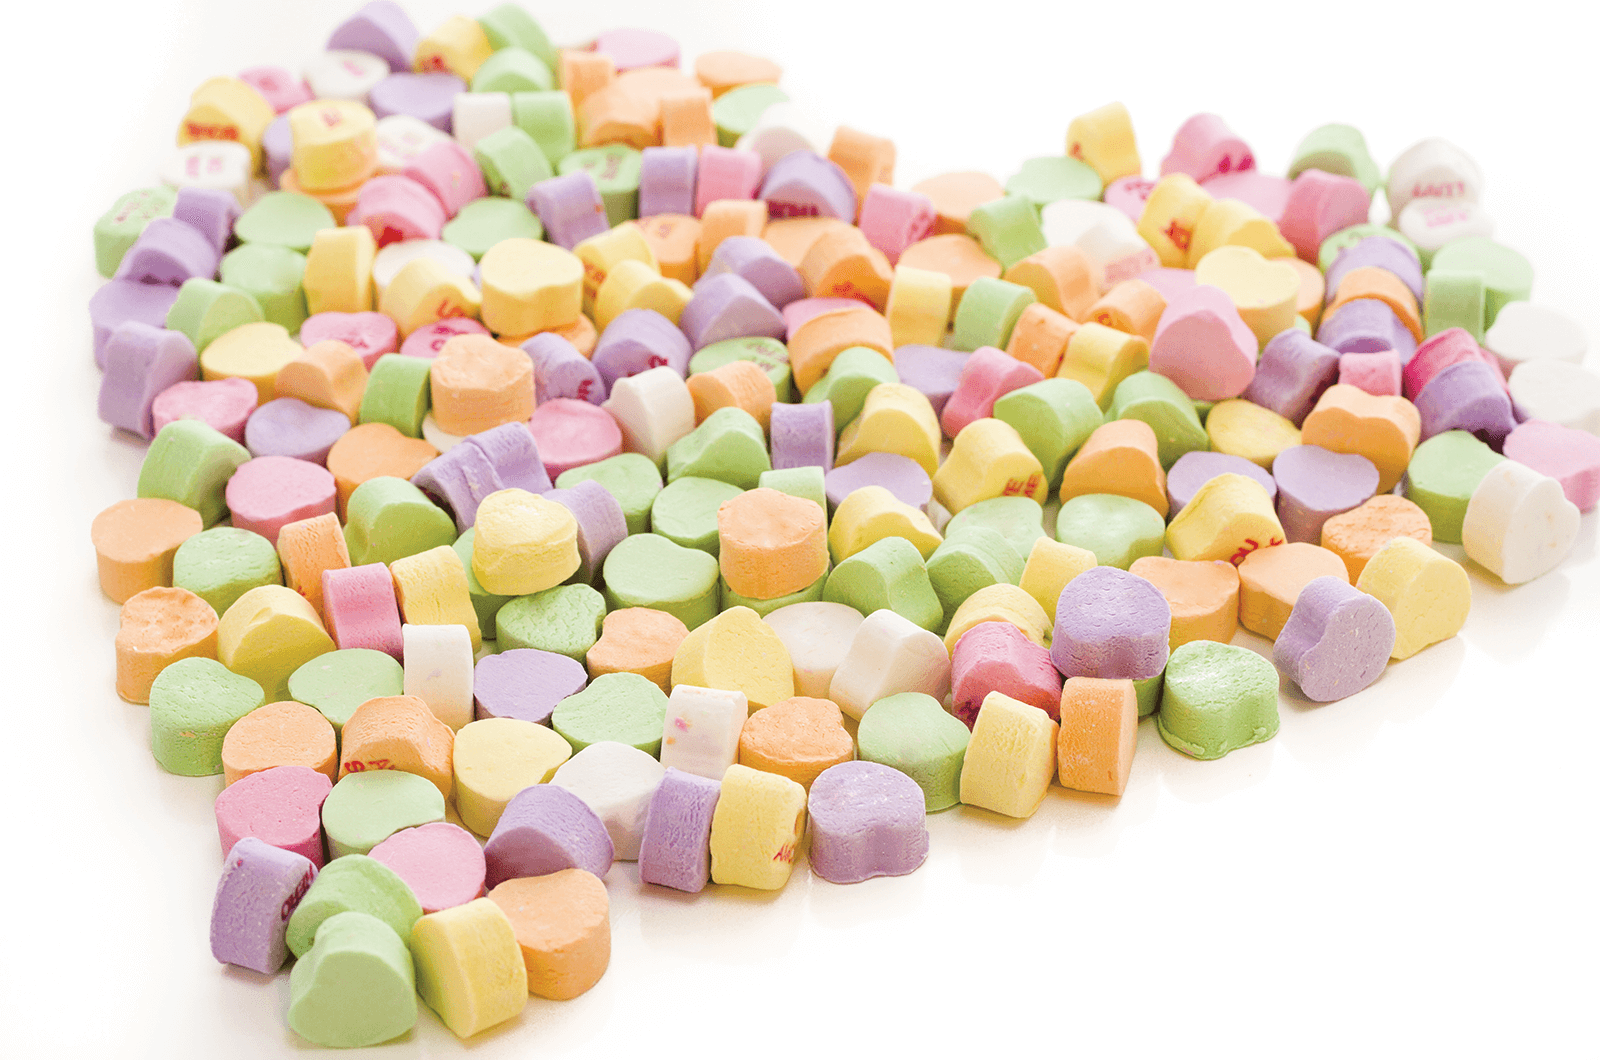 Image of candy hearts with messages